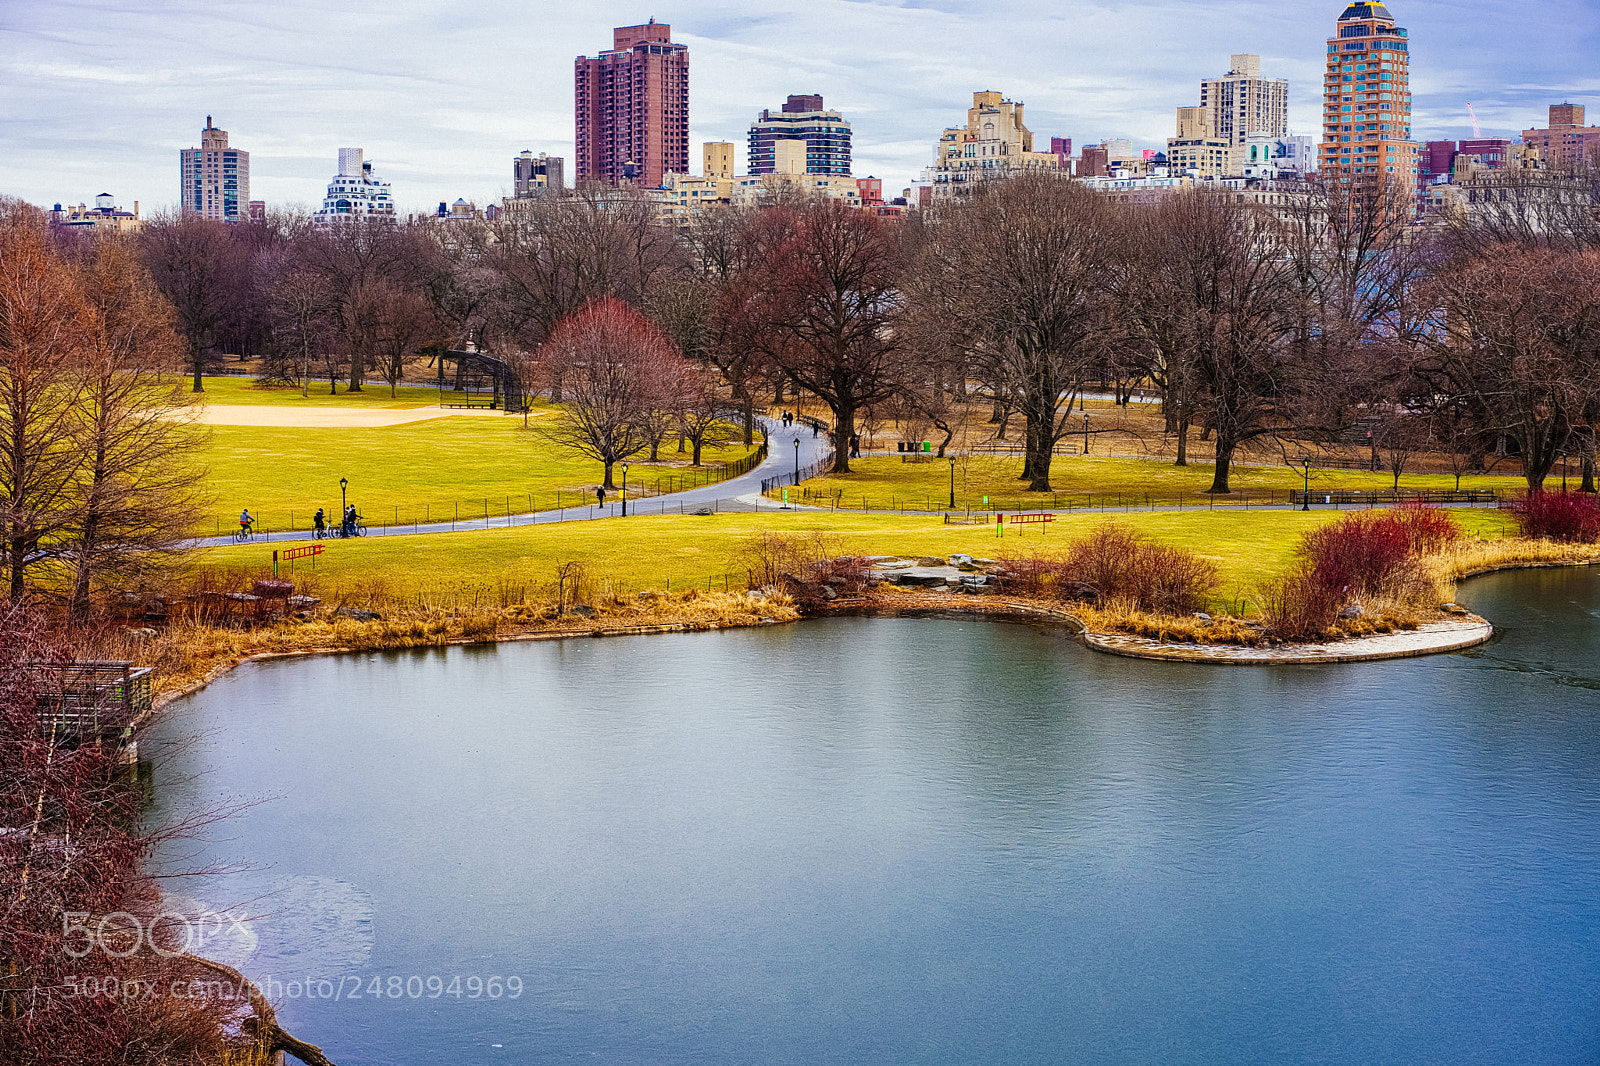 Sony a7 II sample photo. Central park - charming photography